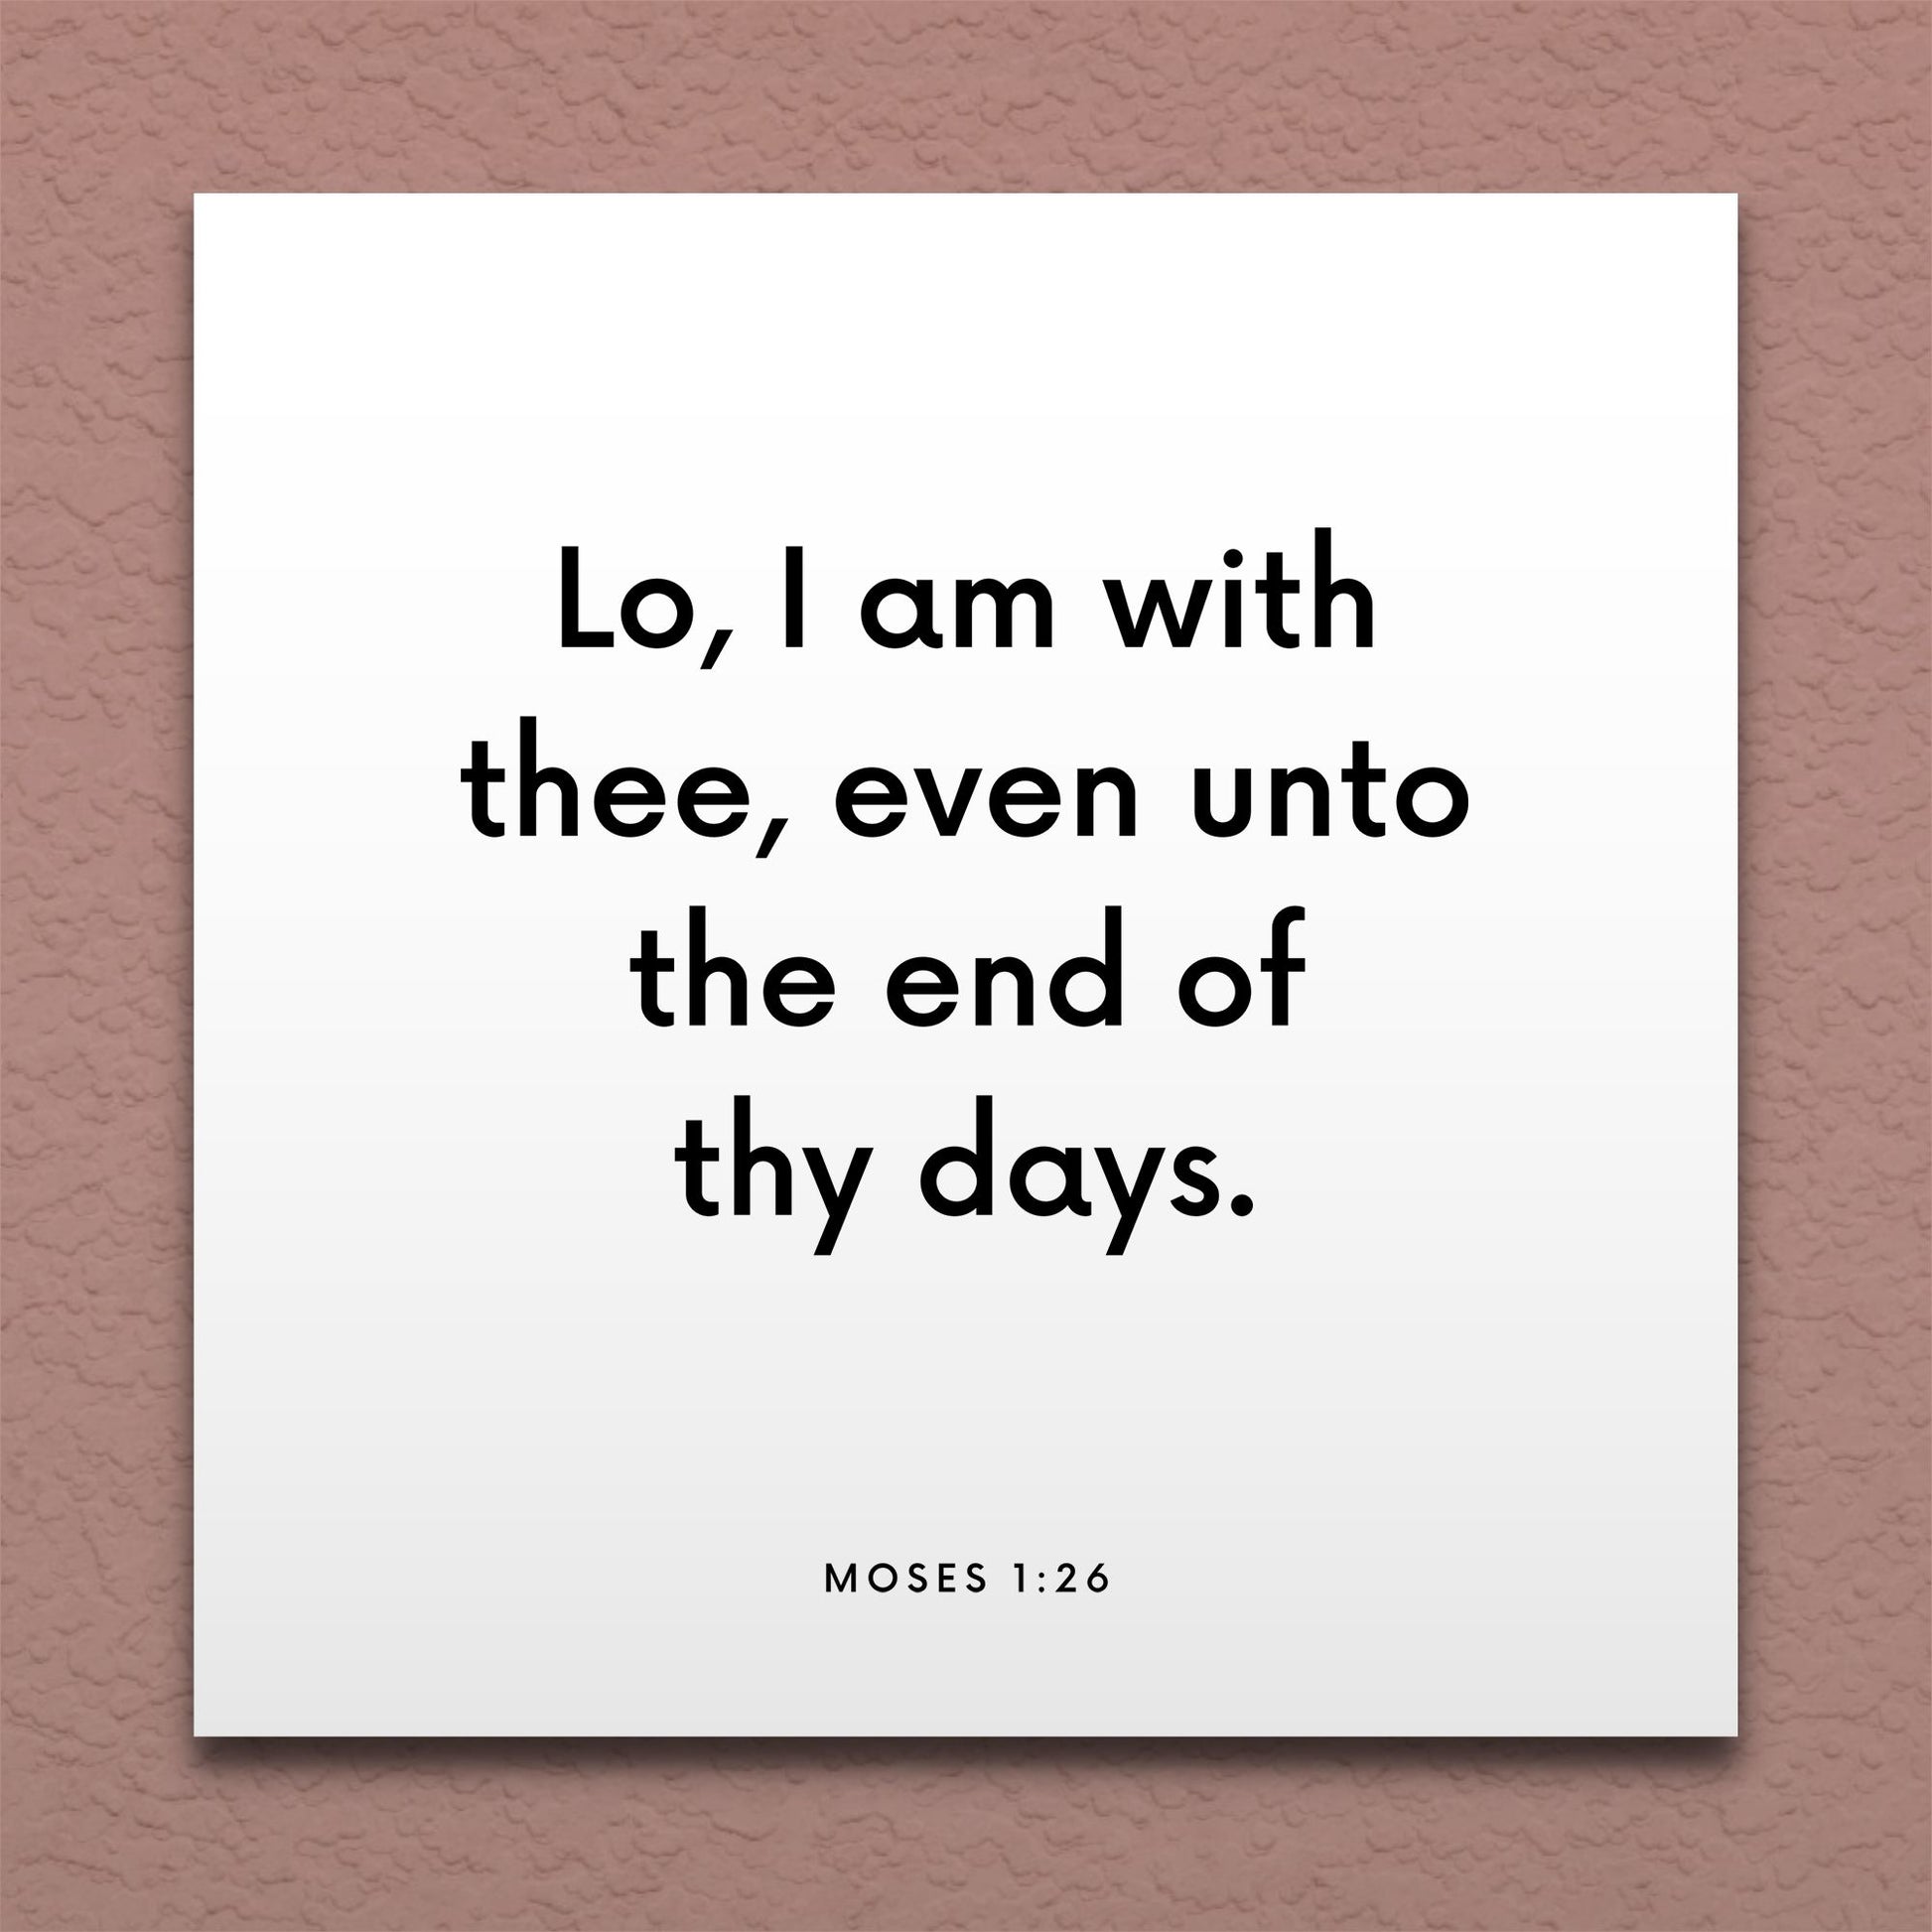 Wall-mounted scripture tile for Moses 1:26 - "Lo, I am with thee, even unto the end of thy days"